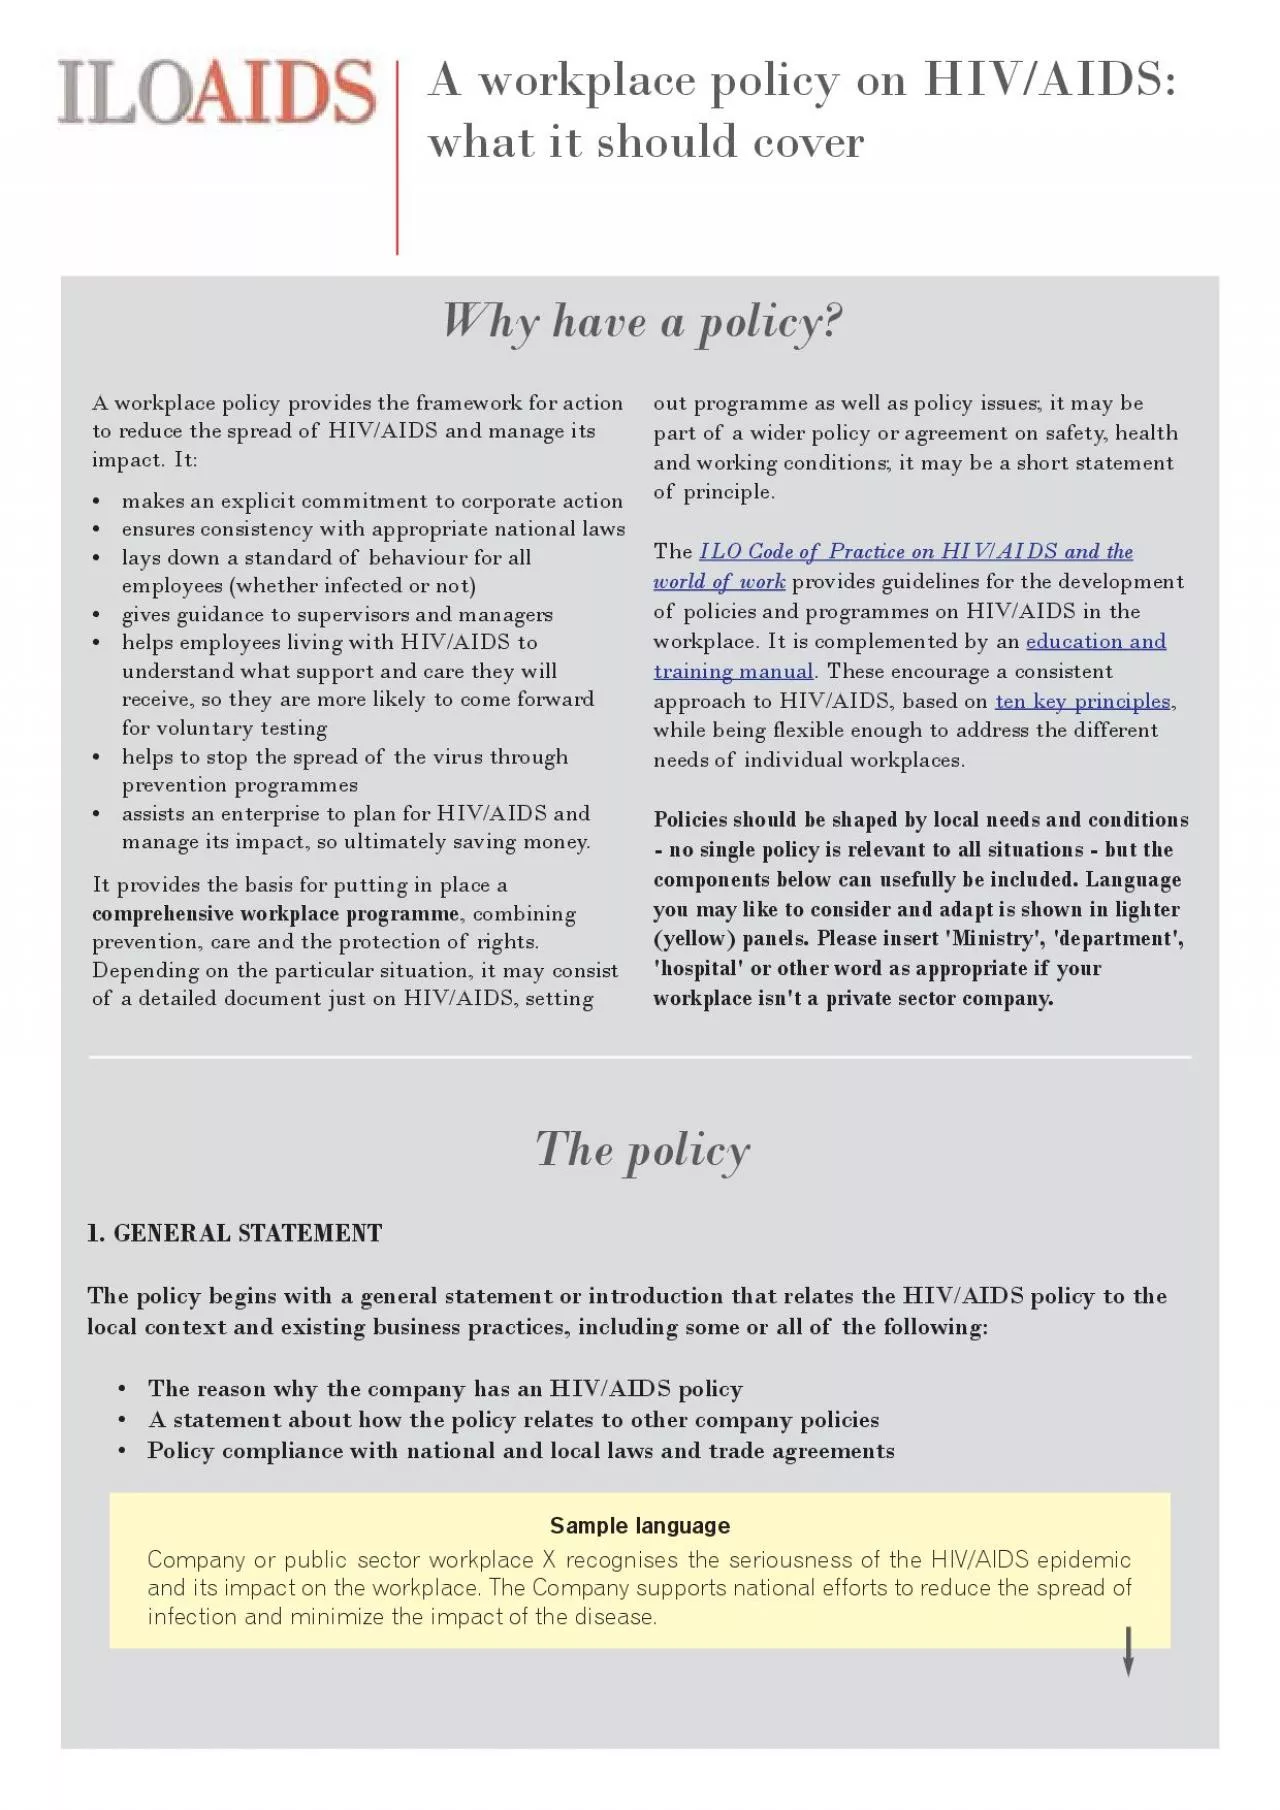 Why have a policyThe policy1GENERAL STATEMENTThe policy begins with